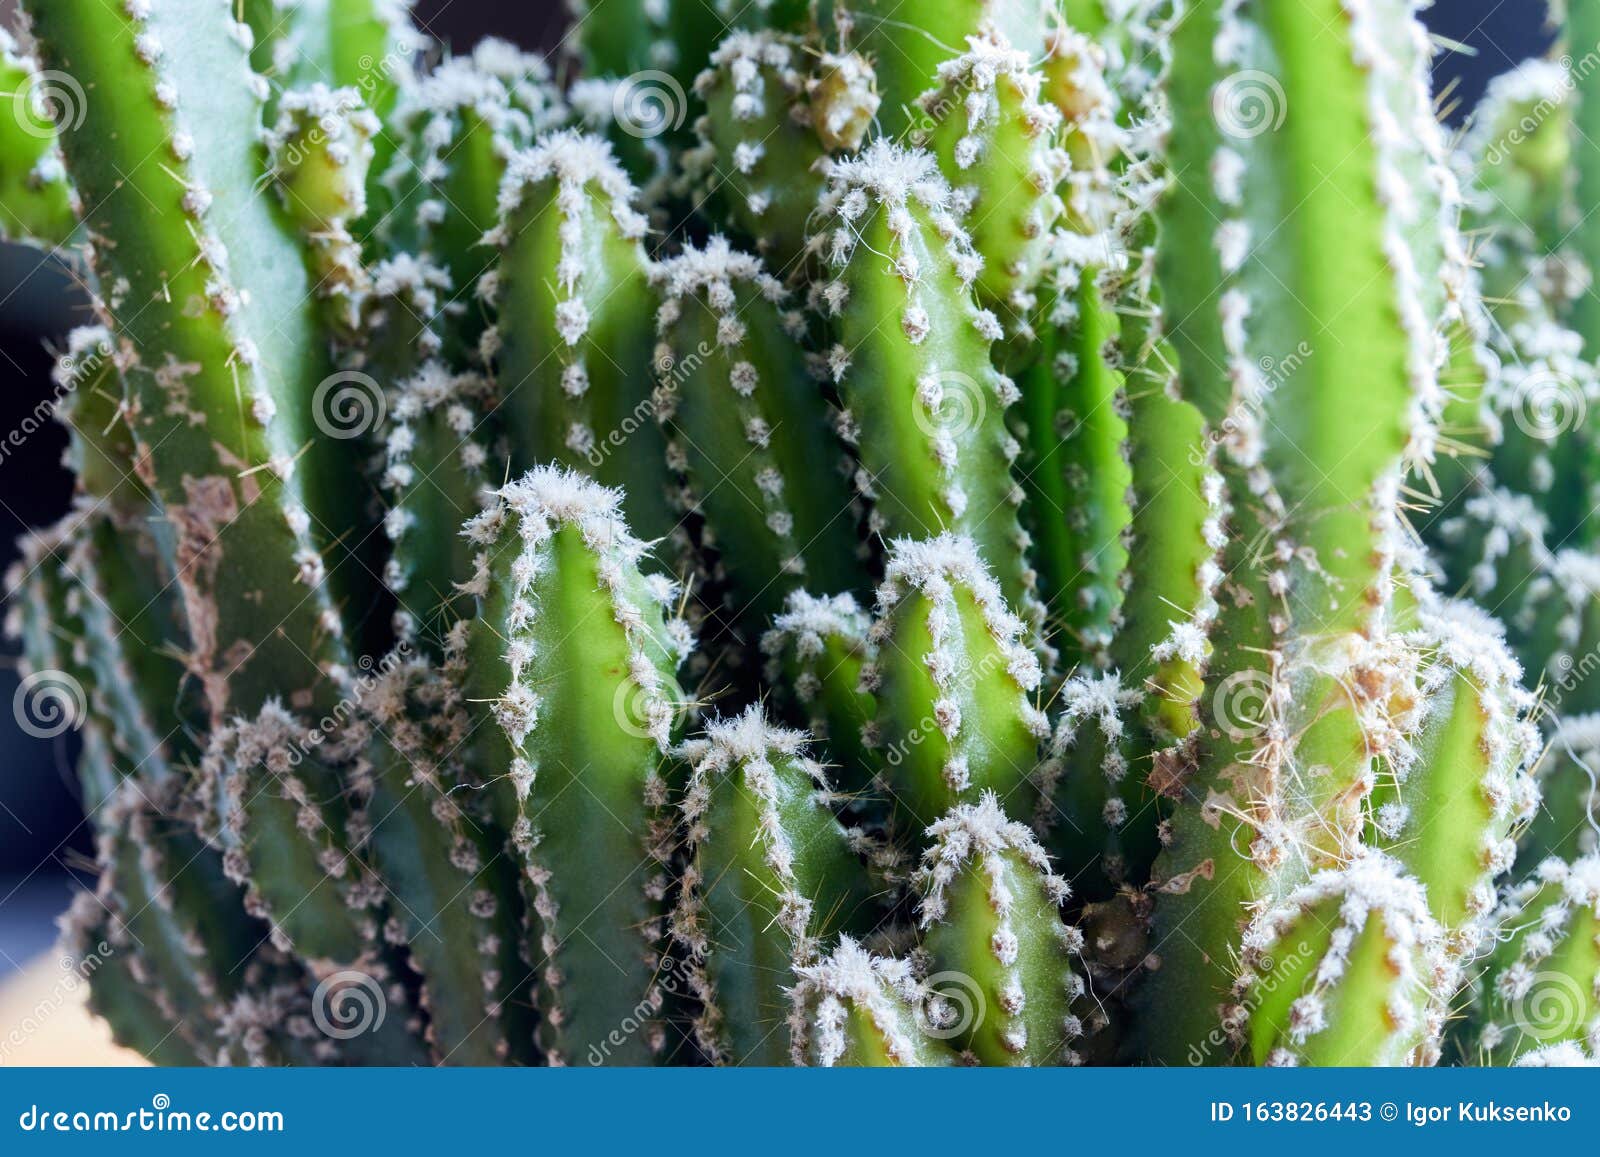 large decorative green cactus with small needles